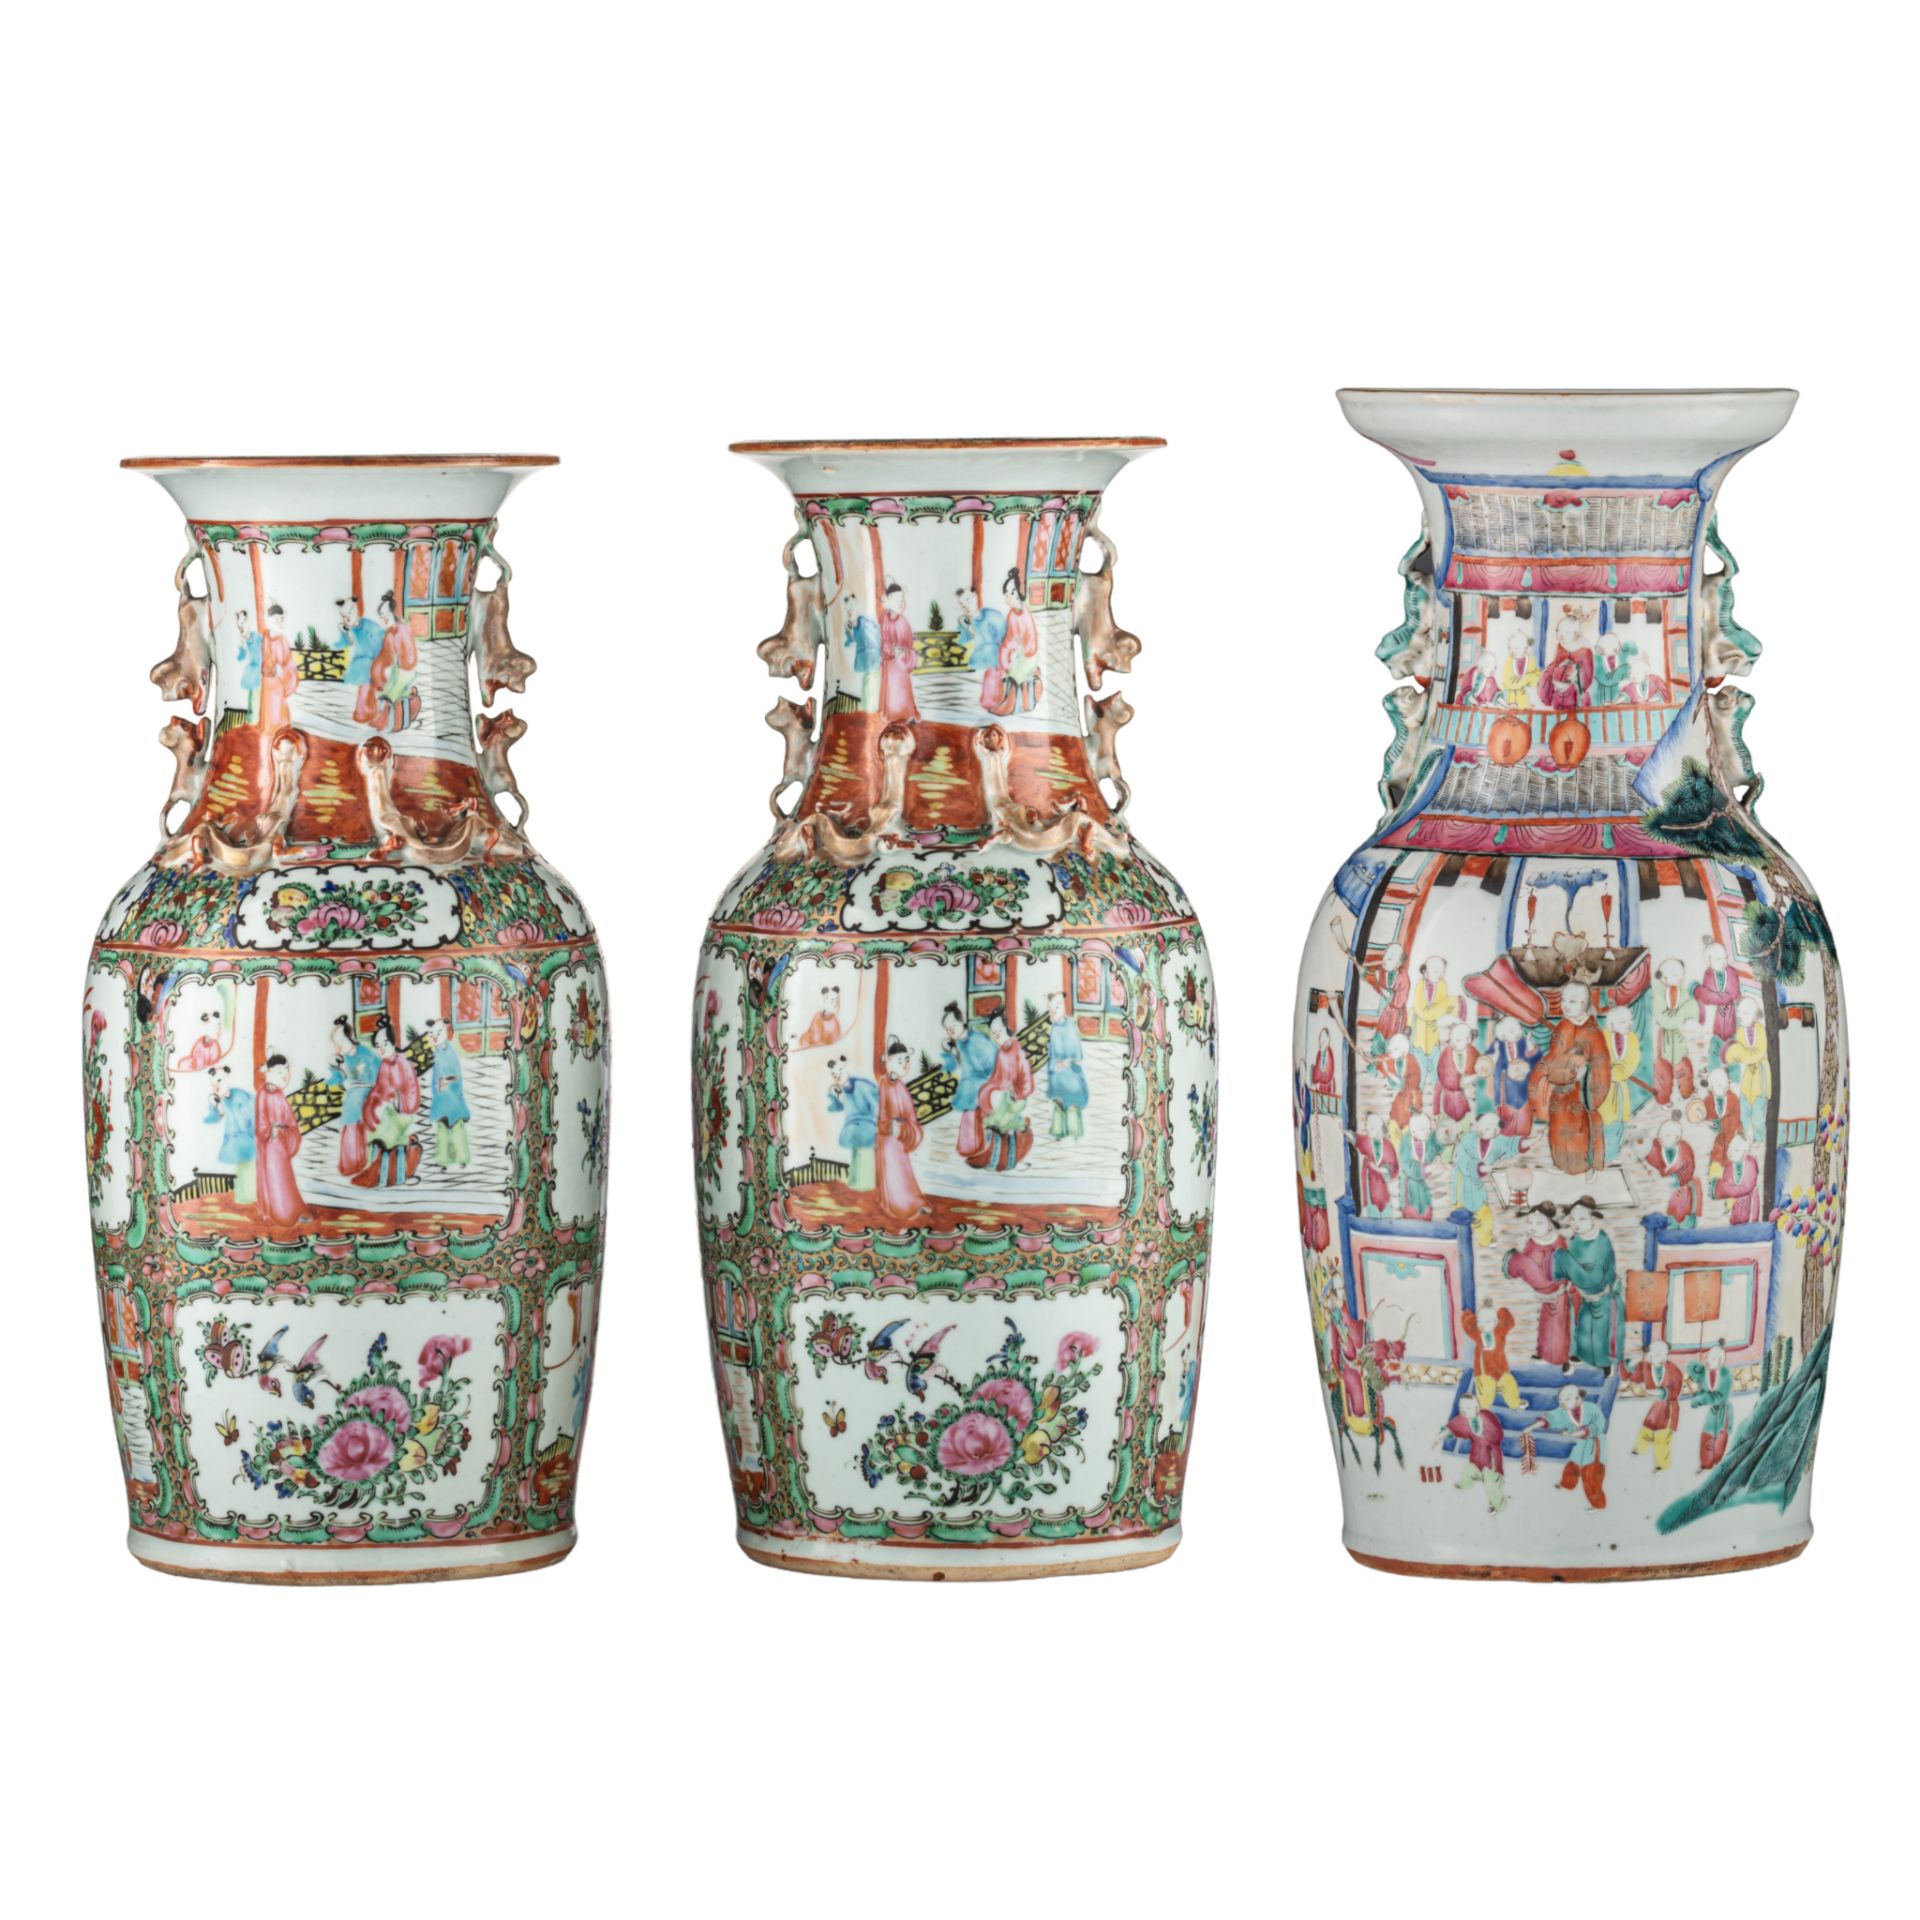 A Chinese famille rose 'One Hundred Boys' vase, 19thC, H 45,5 cm - added a pair of Chinese Canton va